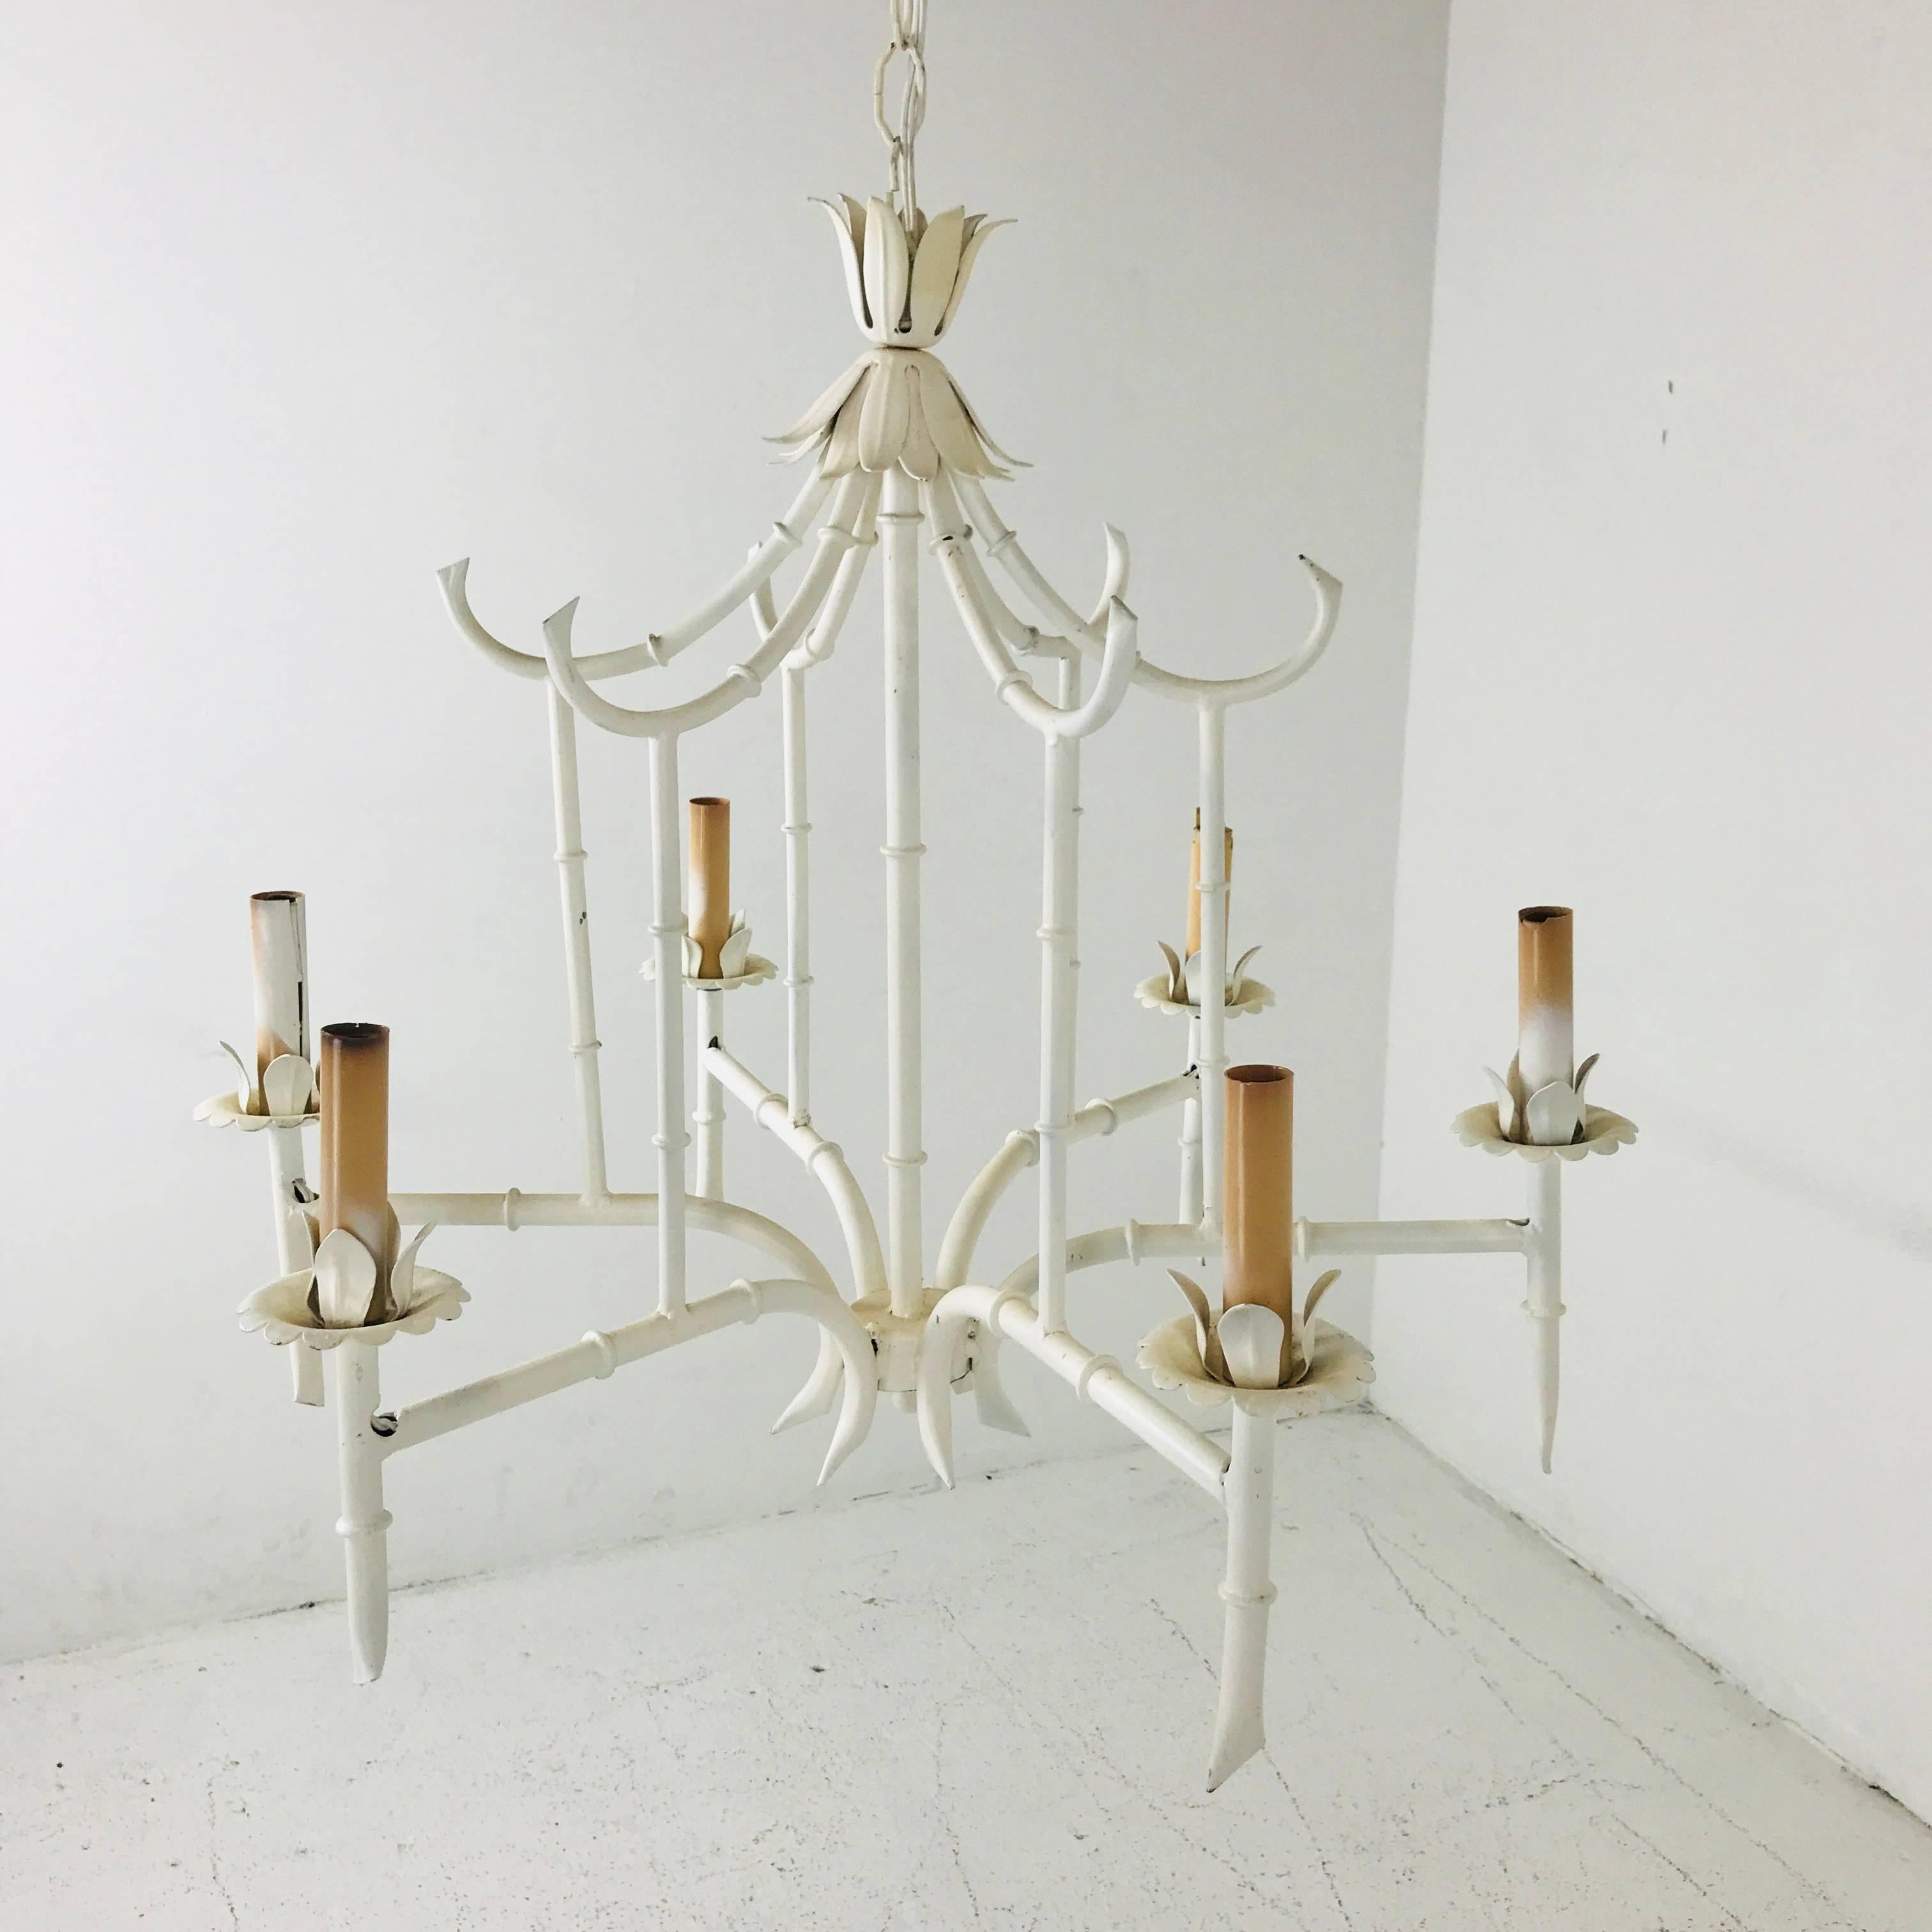 Six-light chinoiserie cage chandelier. In good vintage condition. Refinishing is recommended.

Dimensions:
25.5